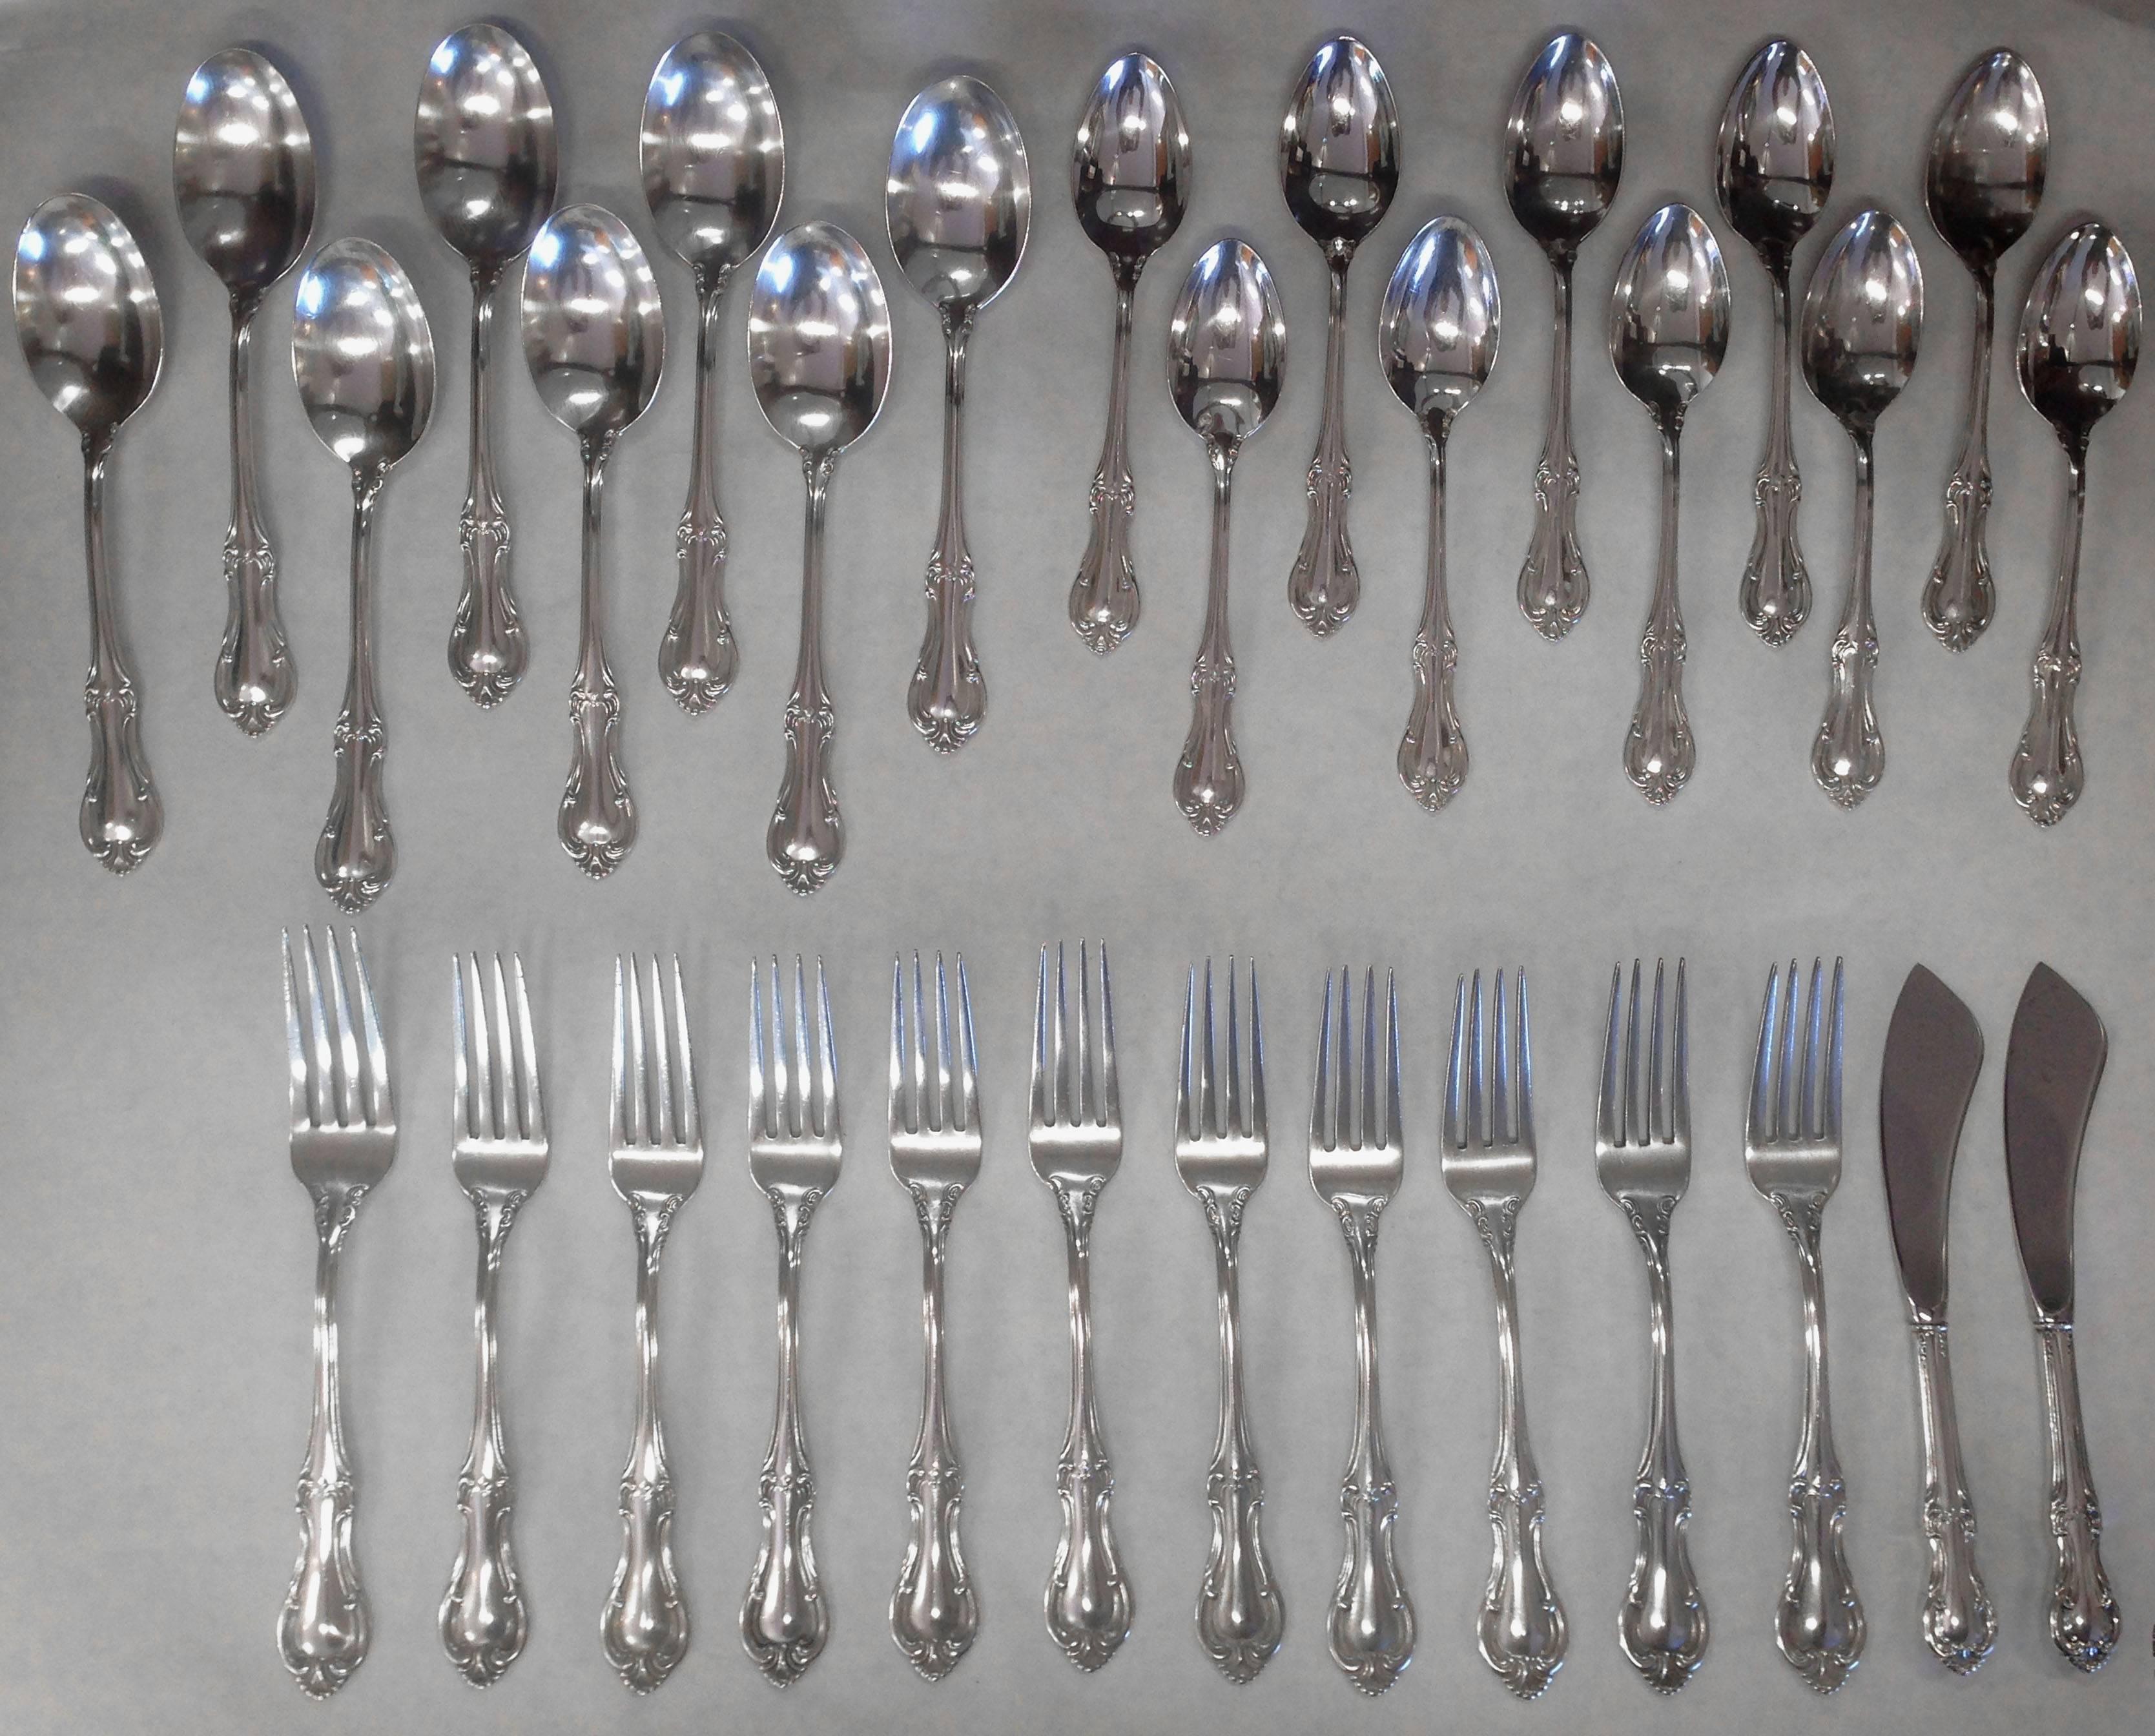 International silver company Joan of Arc pattern of 1940. Nice clean service. A large almost complete service for twelve, many pieces were new in package and the rest had little or no use. Most used were Dinner forks, knives and soup spoons.